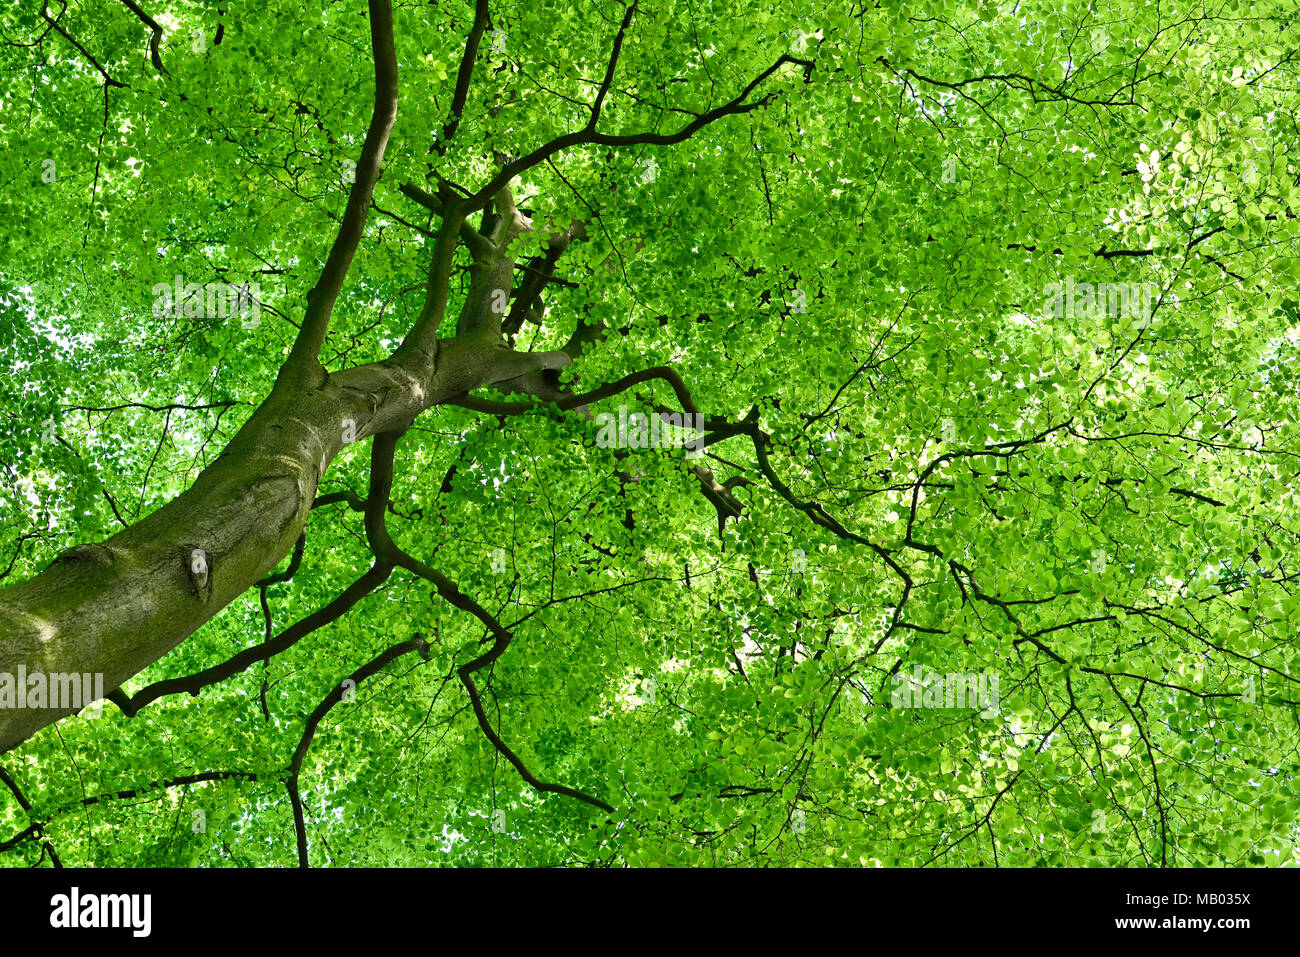 High beech tree with green leaves or summer tree top. Low angle view of an old tree in summer. Stock Photo